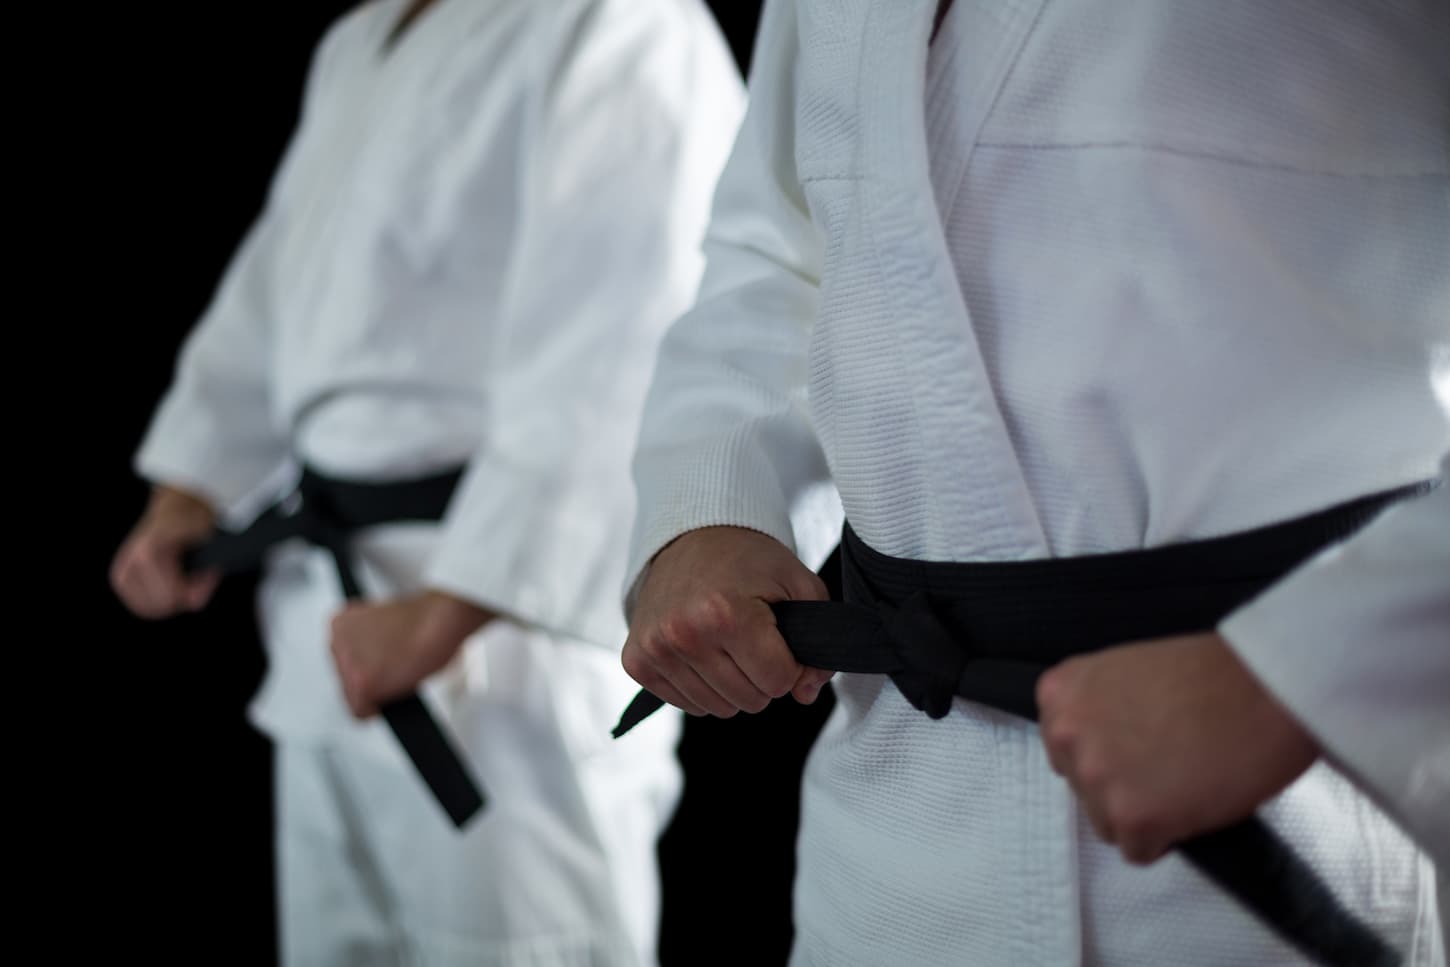 An image of a Midsectiona of Two karate fighters performing karate stances against a black background.